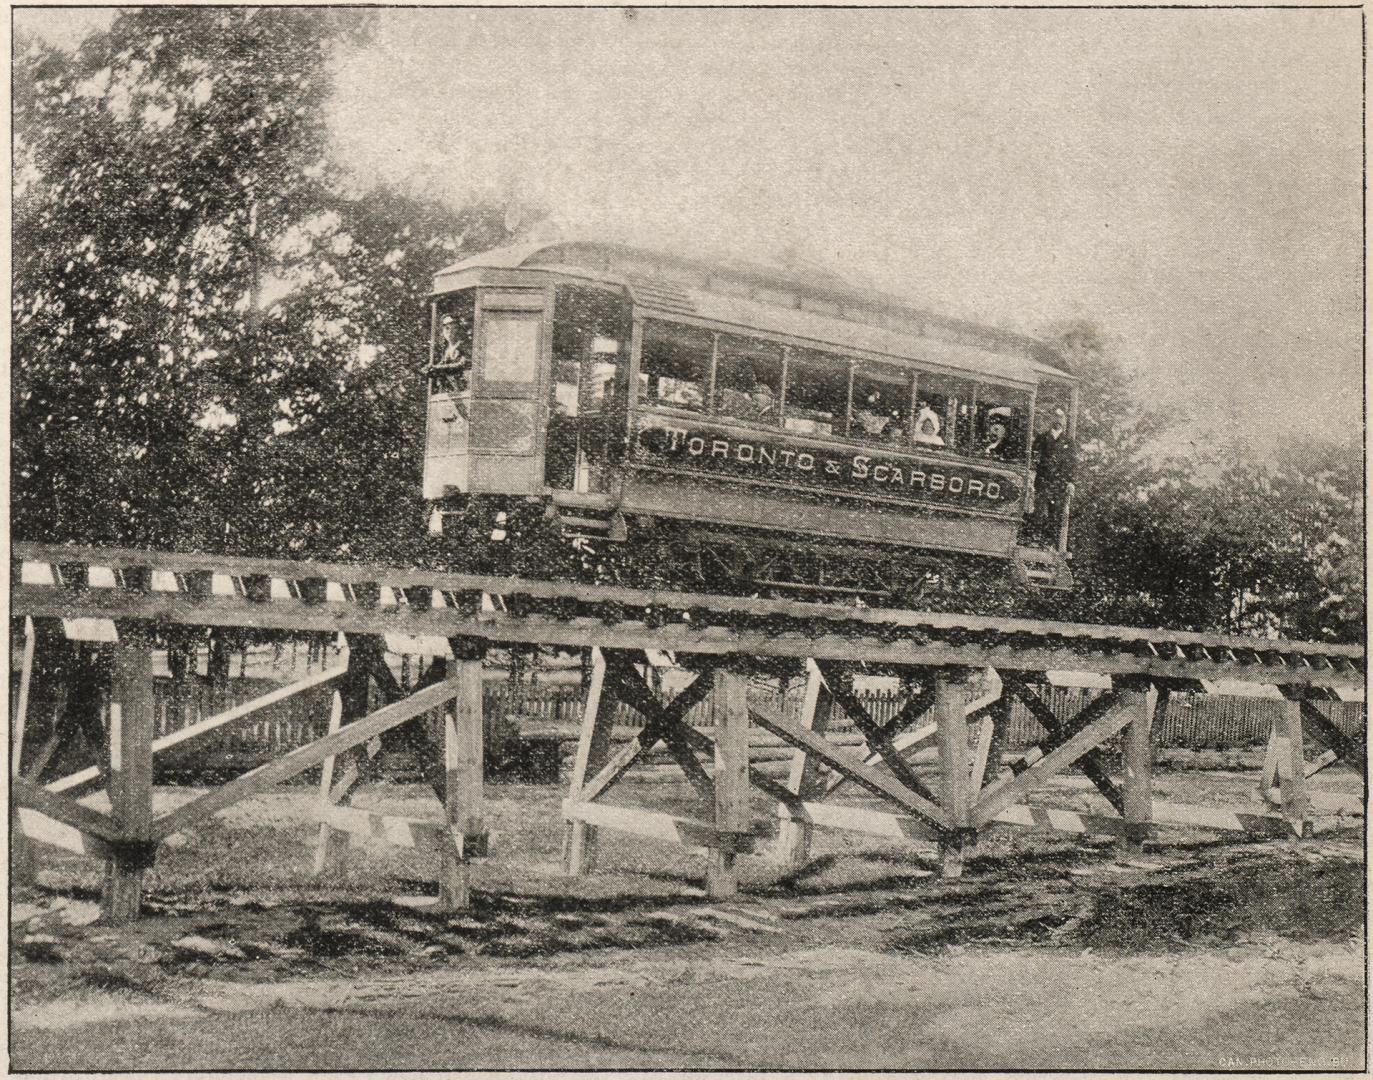 Toronto and Scarboro' Electric Railway trestle, Blantyre Avenue, west side, south of Kingston Road, Toronto, Ont.